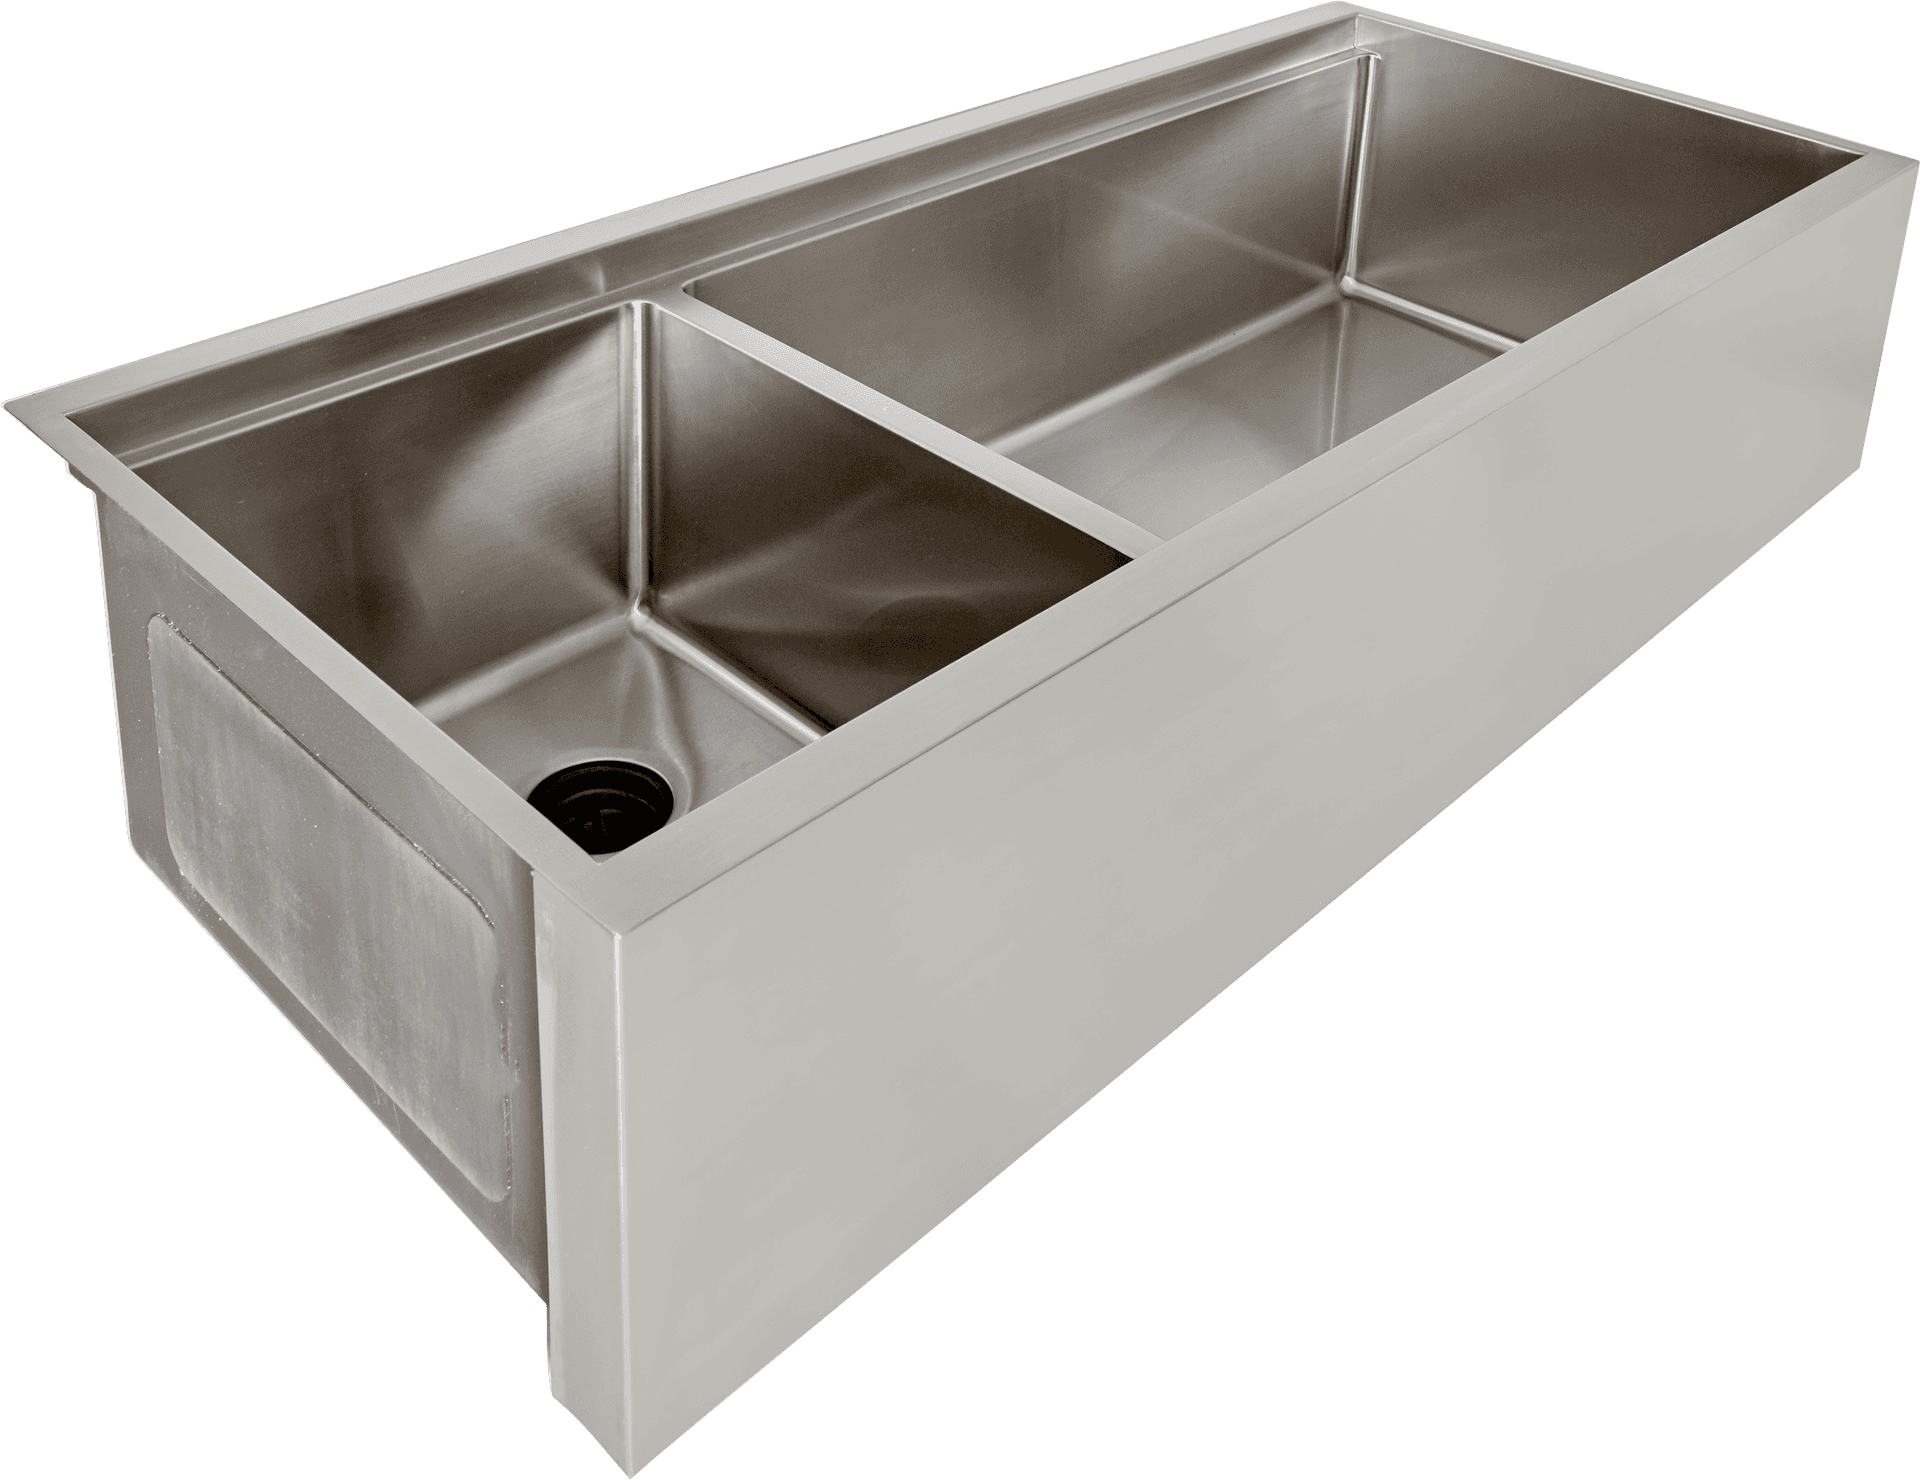 Stainless Steel Double Basin Kitchen Sink PNG image